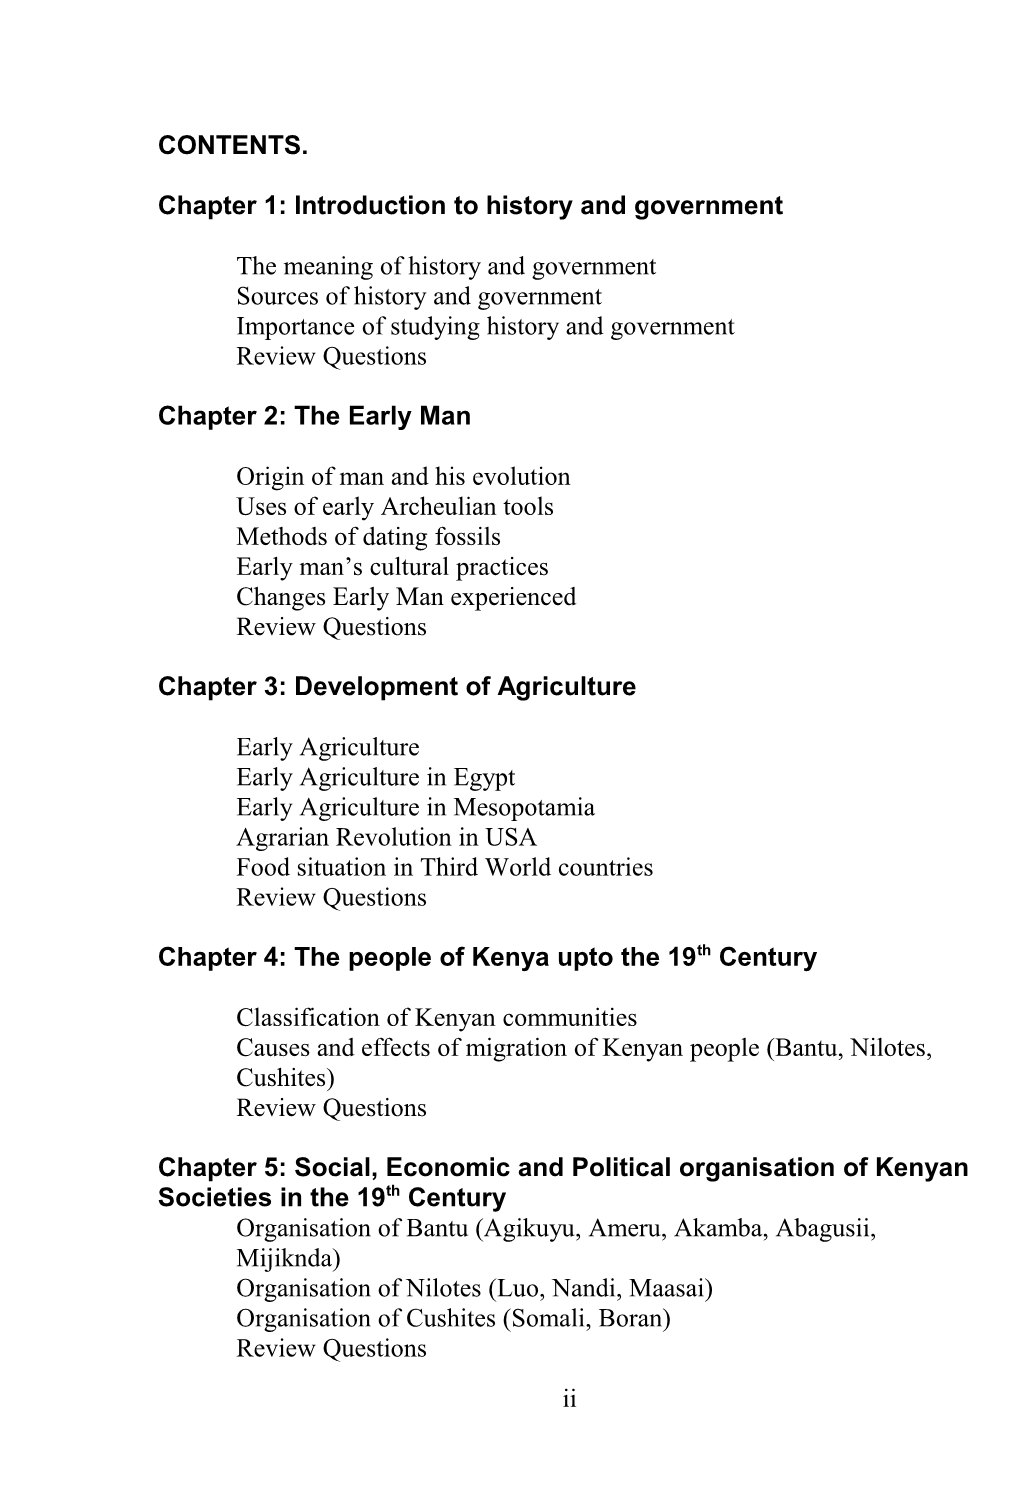 Chapter 1: Introduction to History and Government